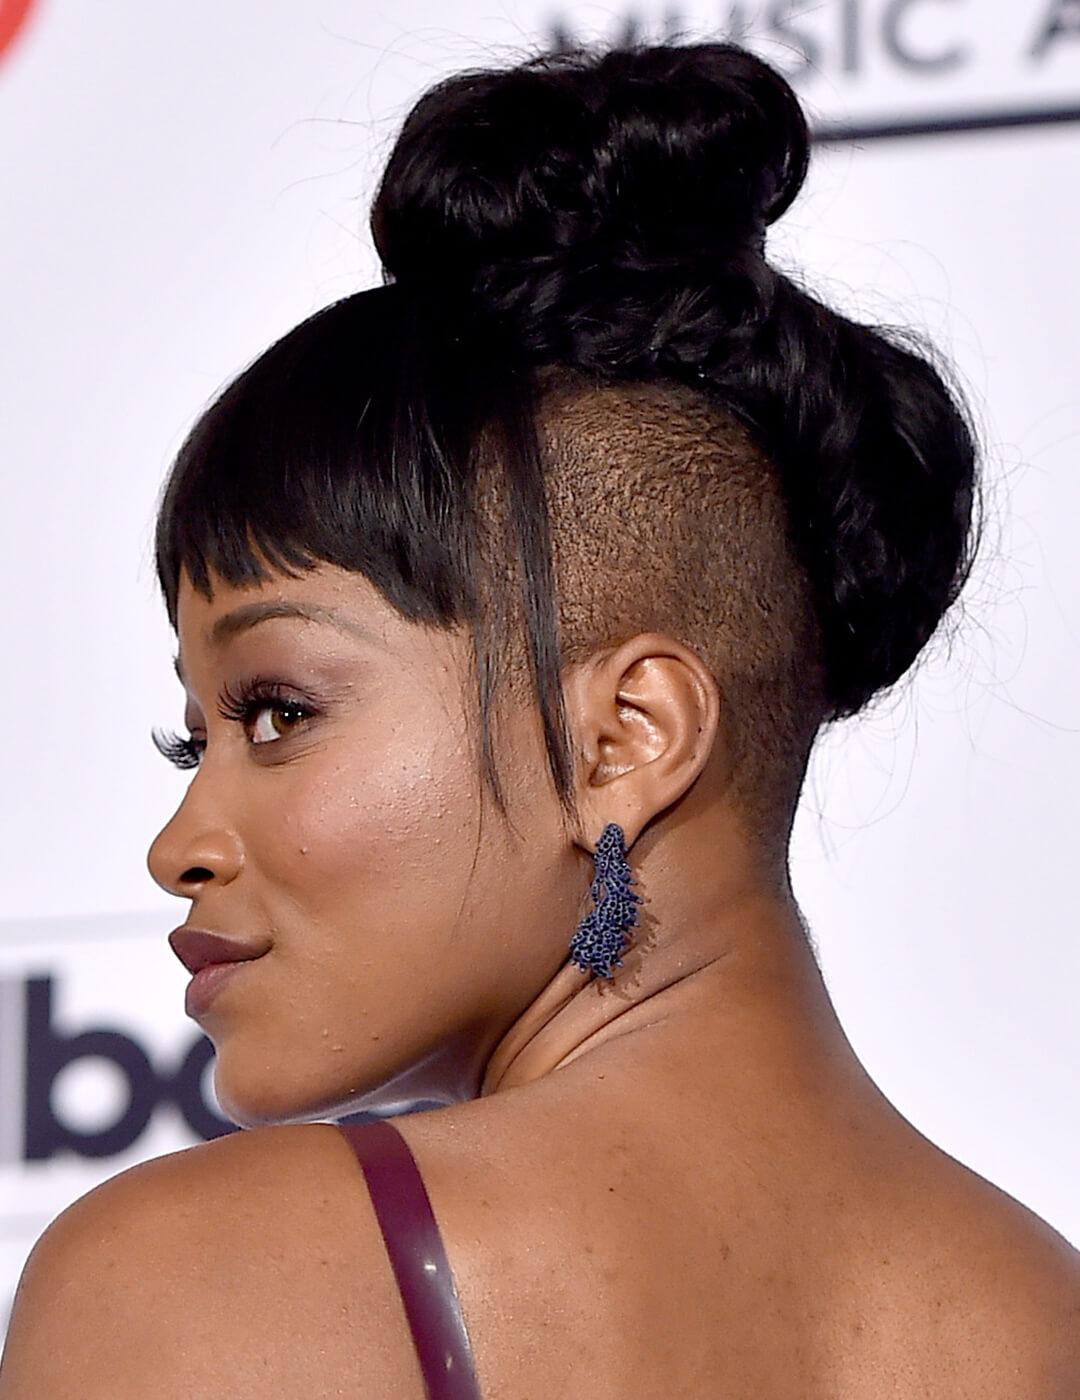 Keke Palmer showing off her top knot undercut hairstyle with bangs